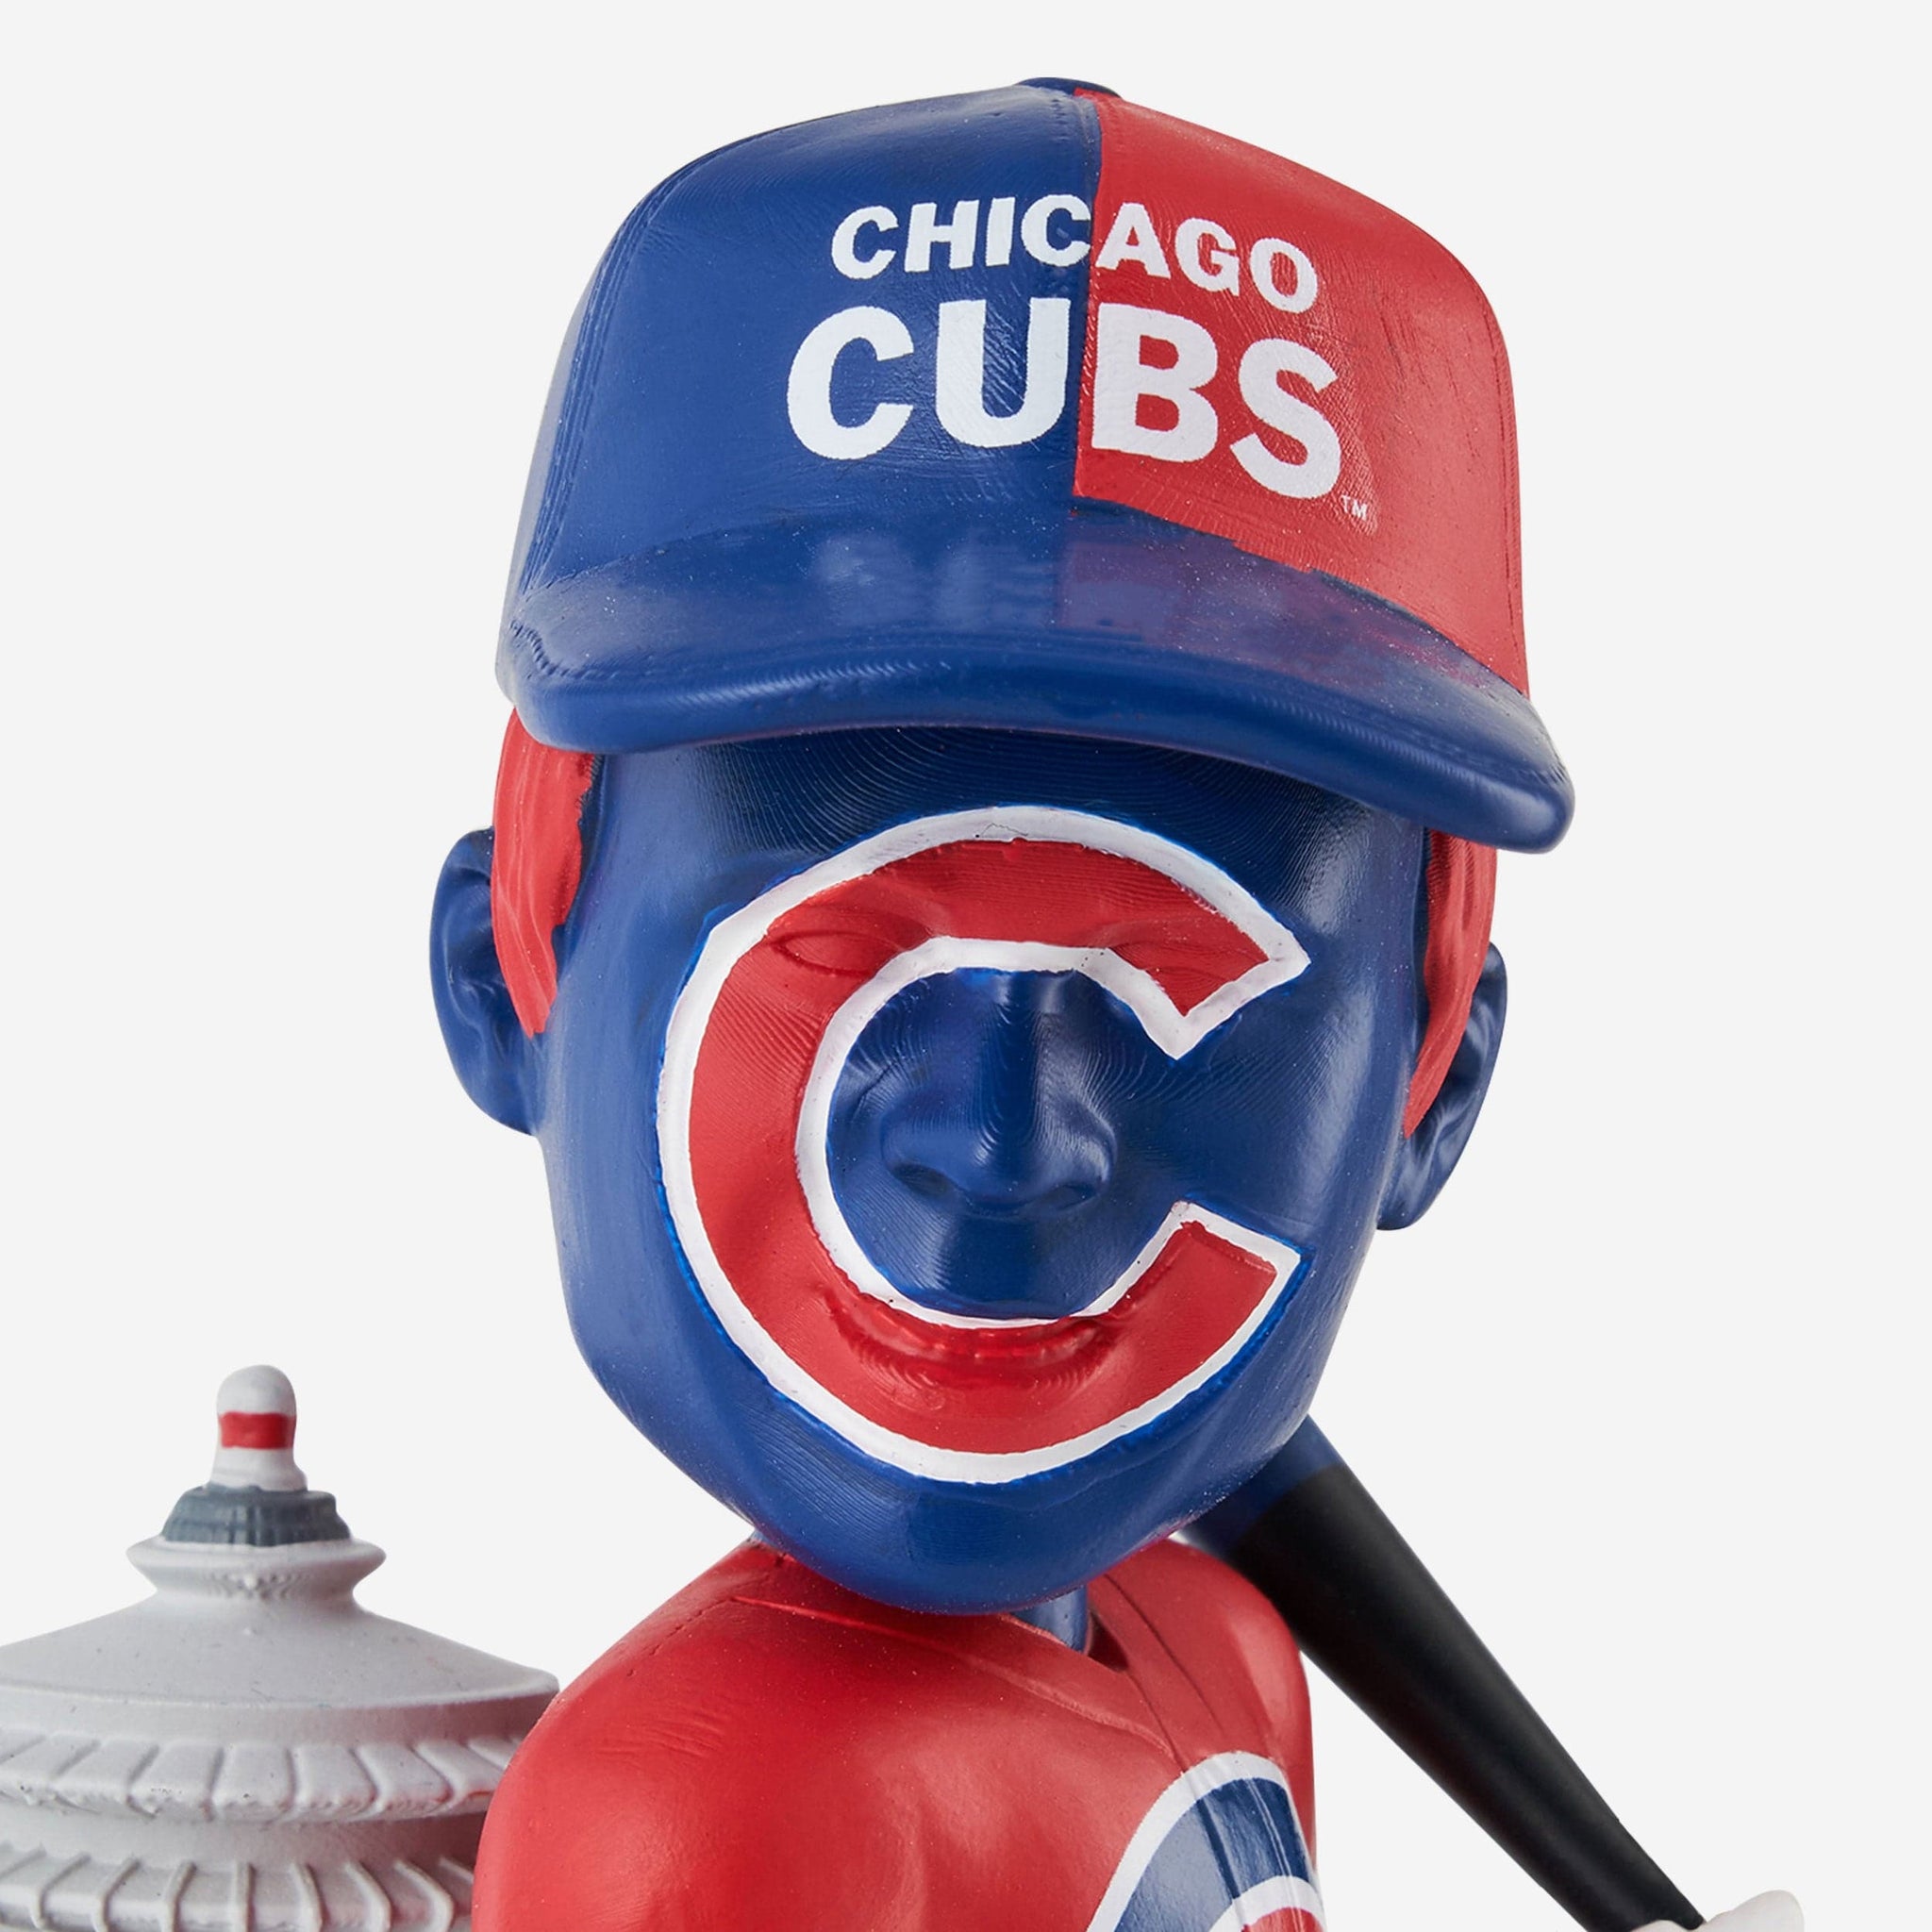 New special-edition holiday Chicago Cubs hats available now